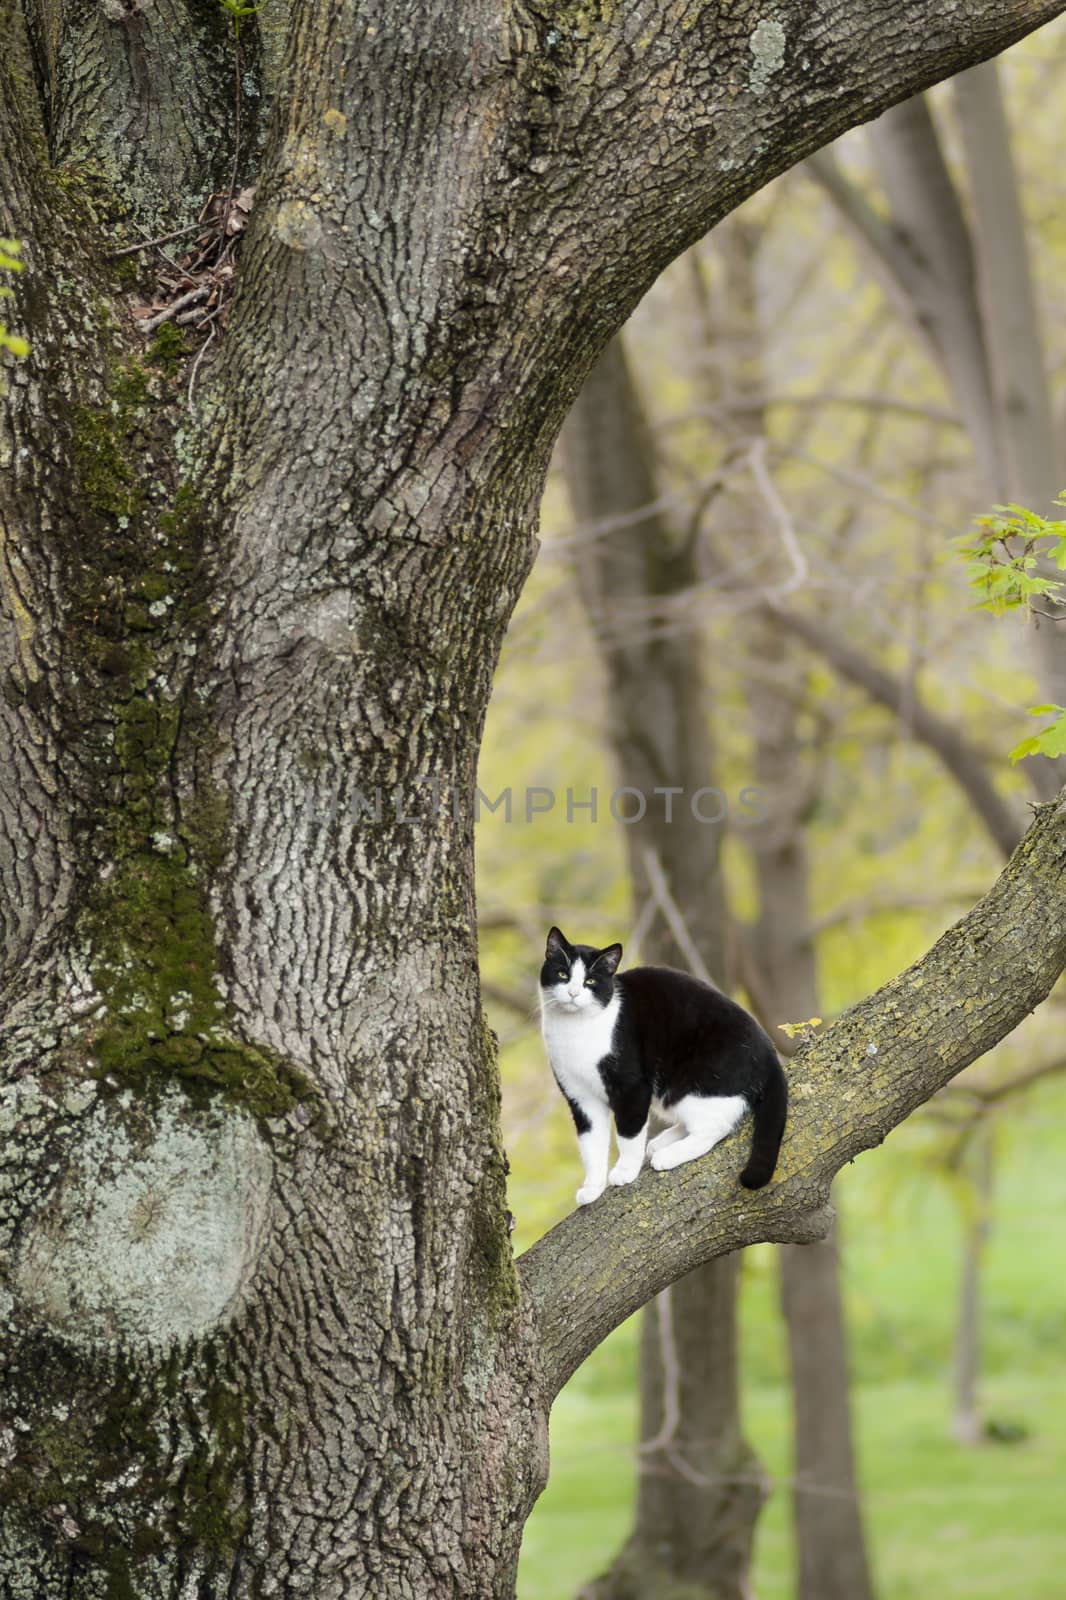 Black and white cat sitting on a tree branch